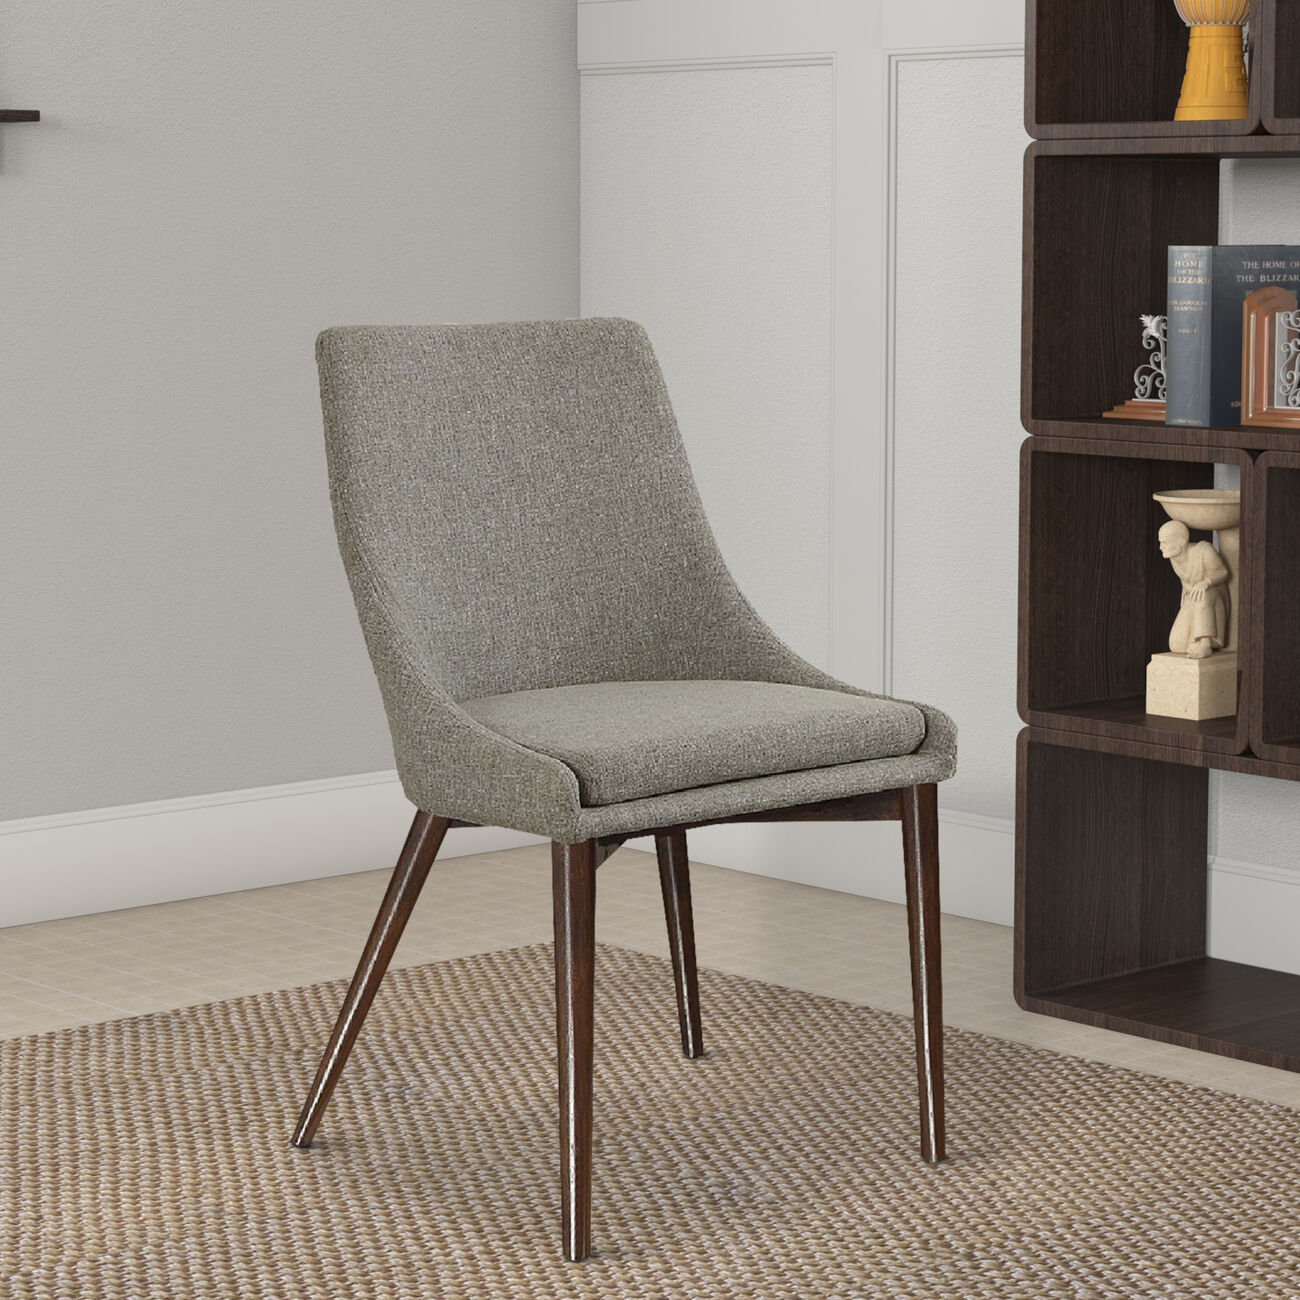 Wooden Side chair With Fabric Upholstered Seat And Backrest, Gray & Brown, Set of 2